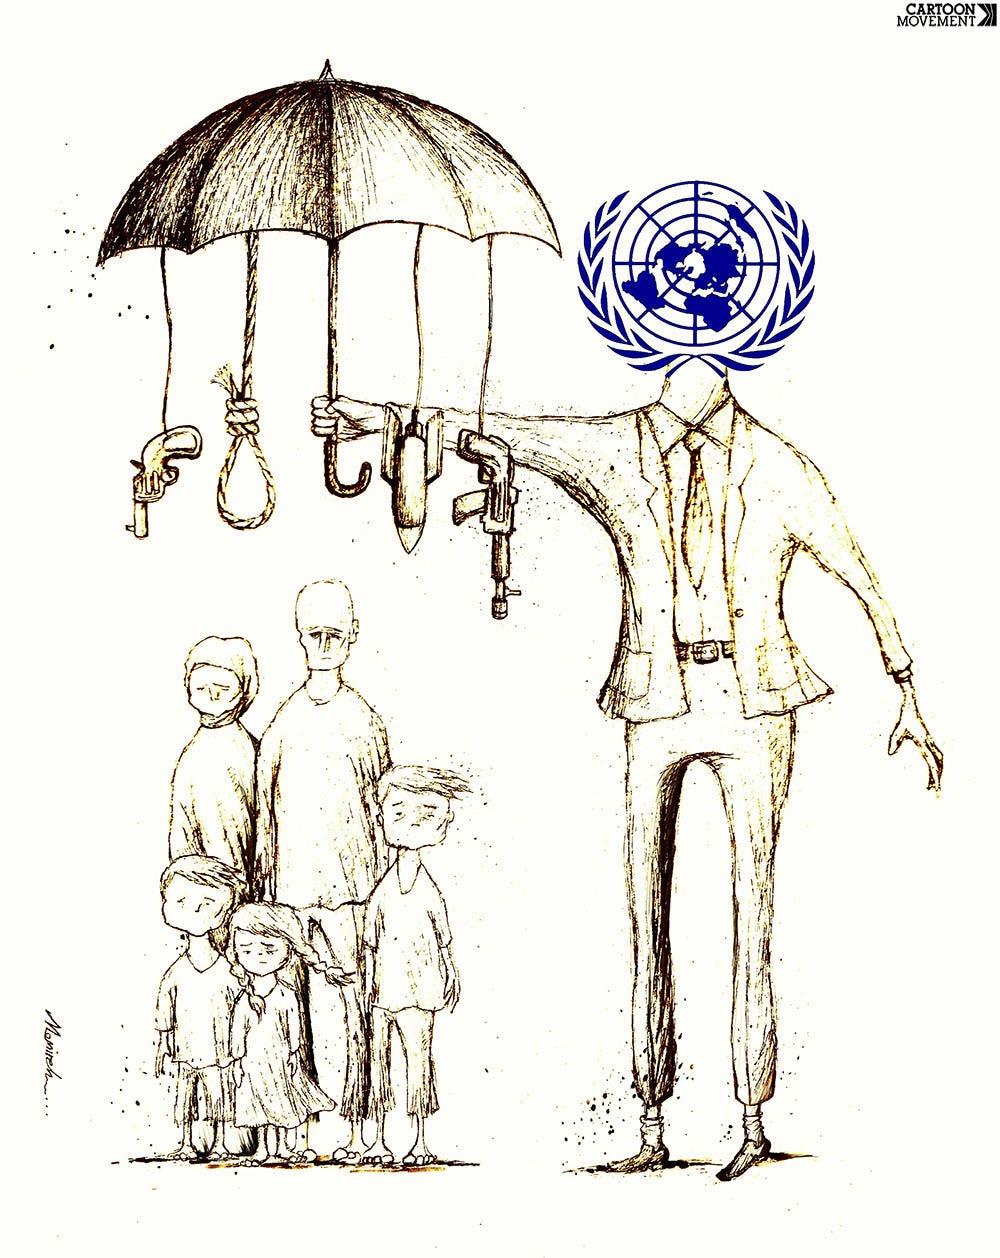 Cartoon showing a man with his head replaced by a United Nations logo holding an umbrella. From underneath the umbrella dangle a noose, a gun, and a bomb. Below the umbrella stands a frightened family.